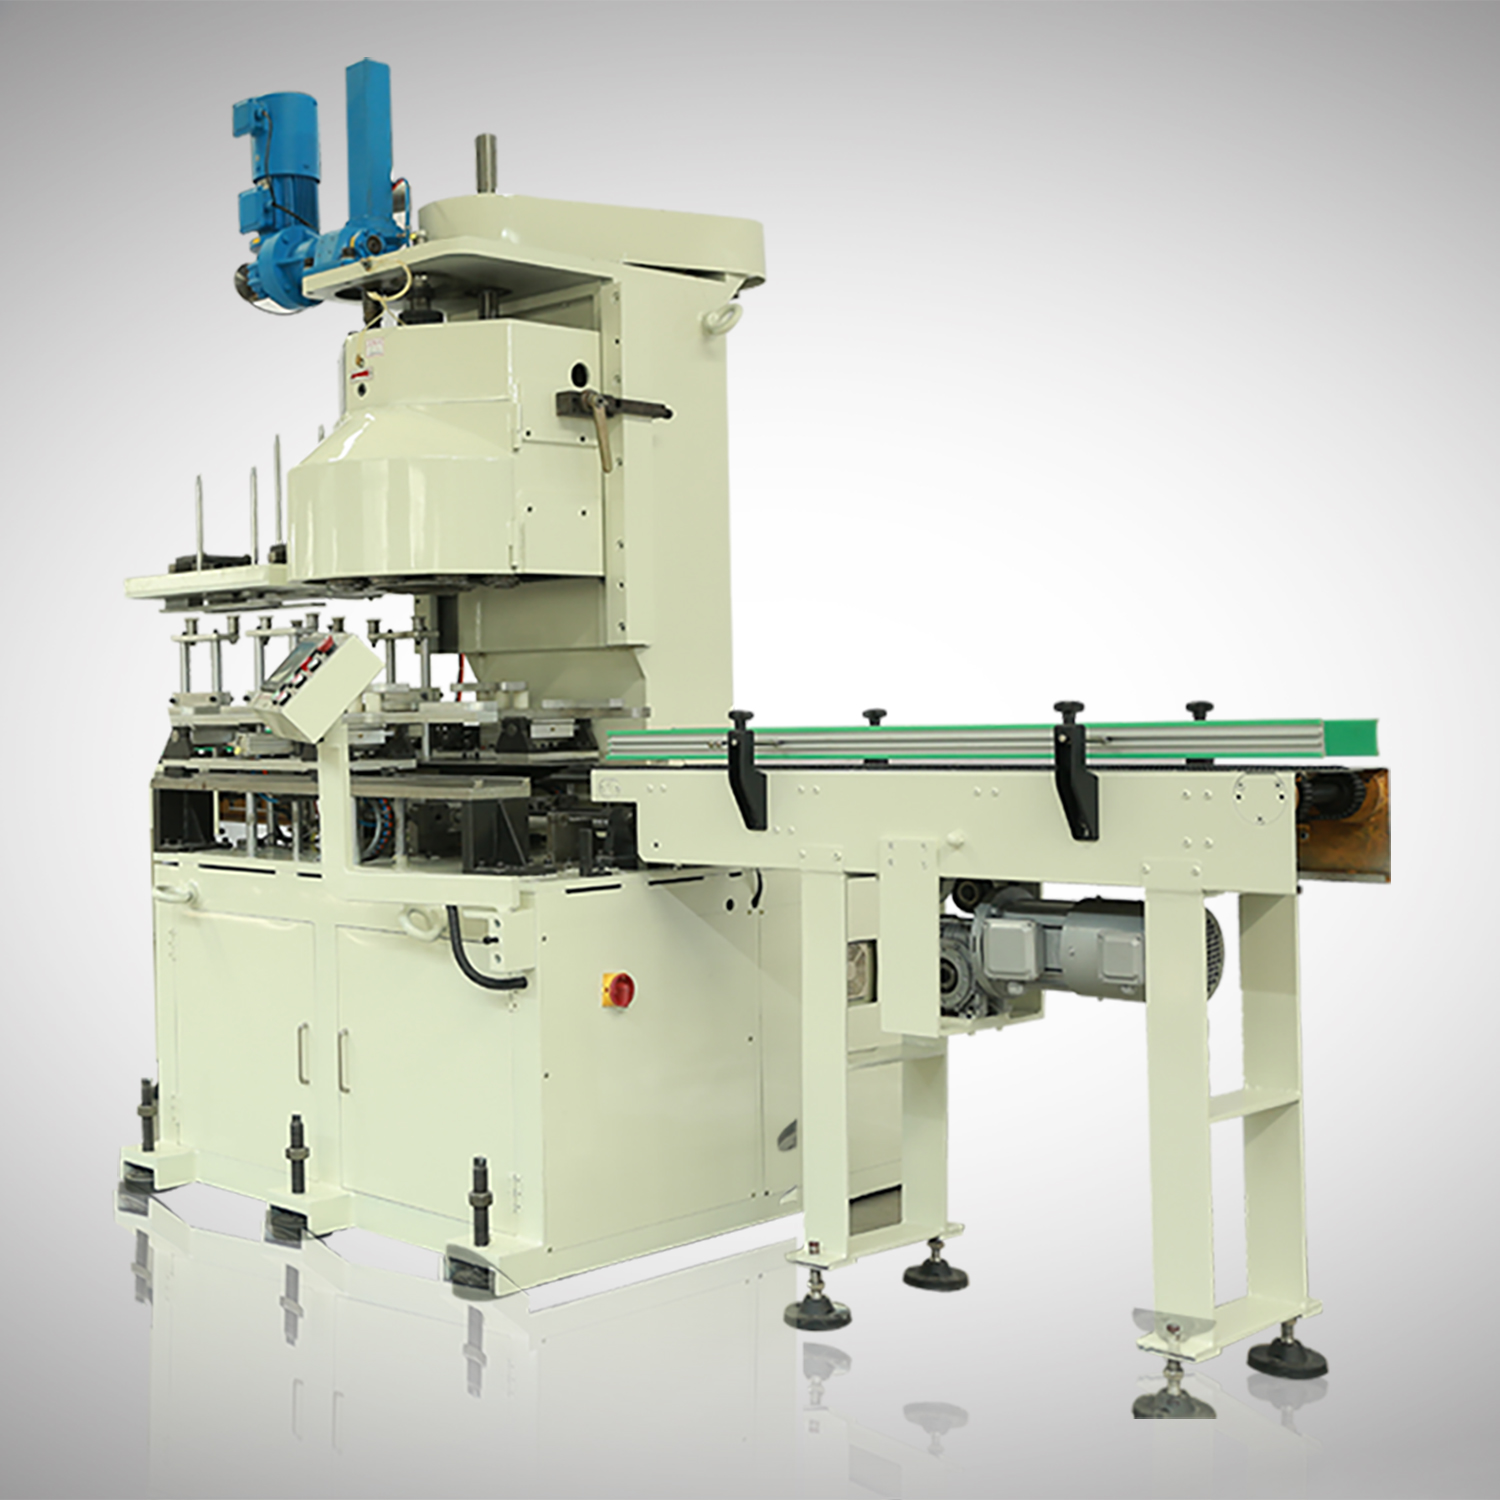 GT4B30 Automatic can sealing machine